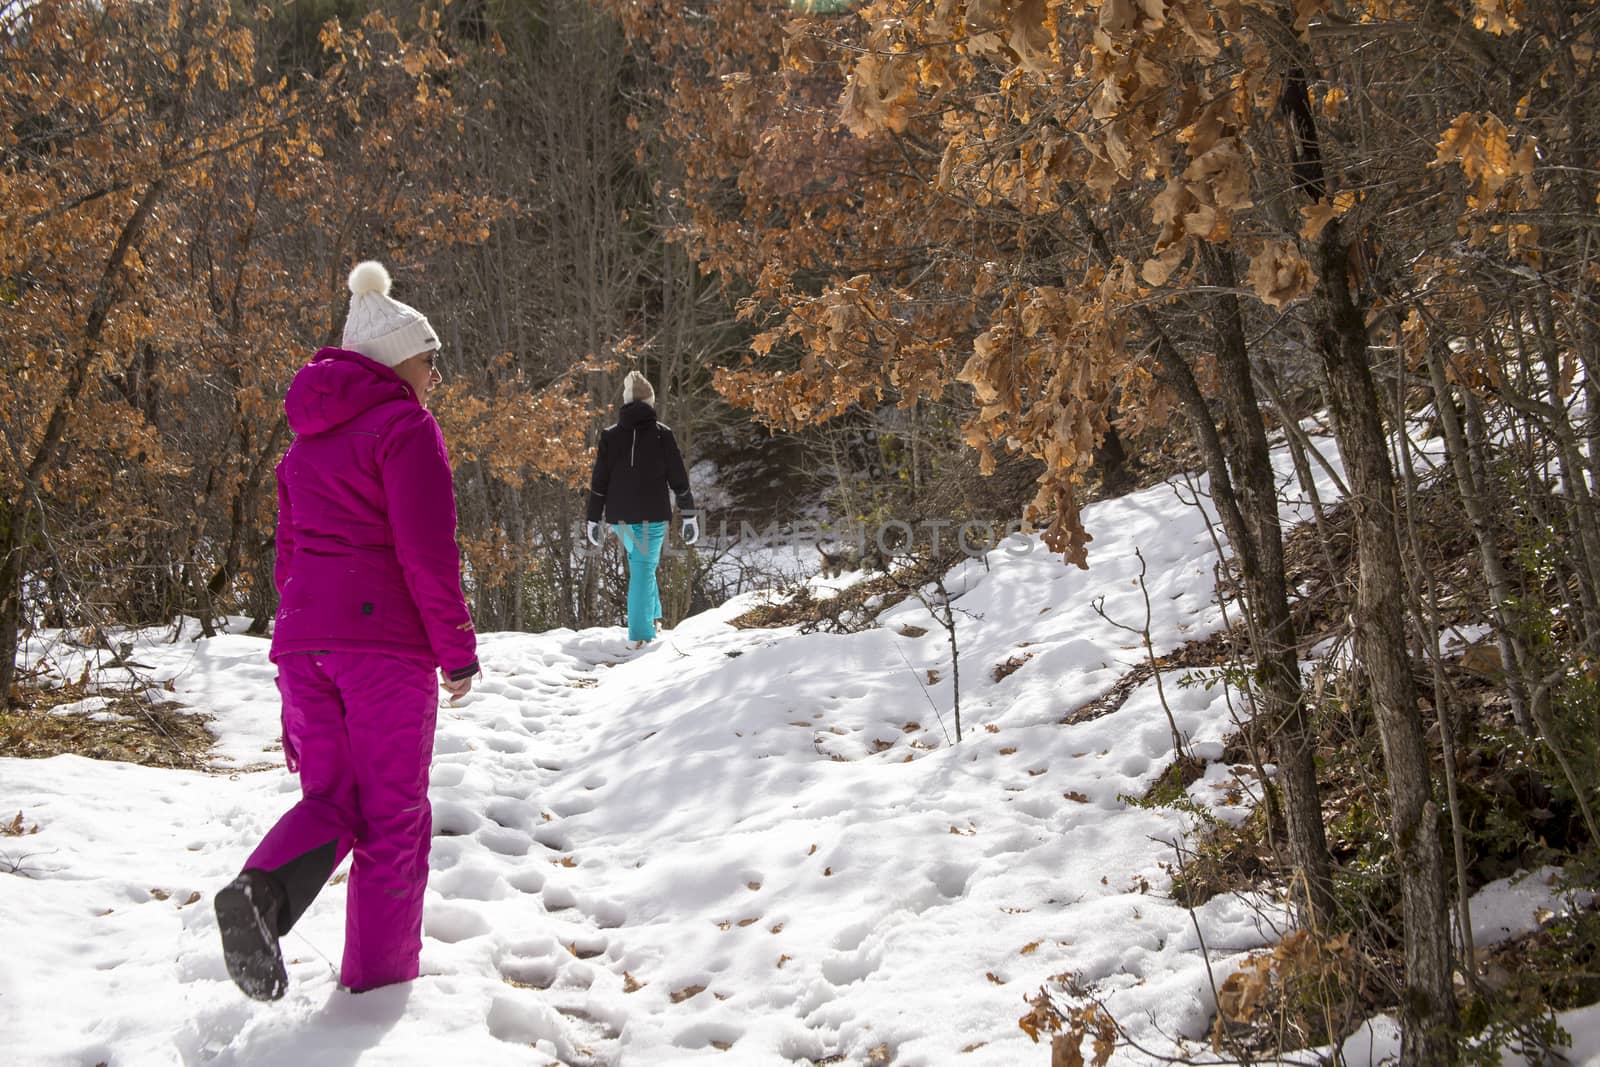 Mom and daughter, dressed in ski suits, are hiking in a snowy winter forest on a sunny day. On the branches of trees, dry yellow leaves are illuminated by the sun.